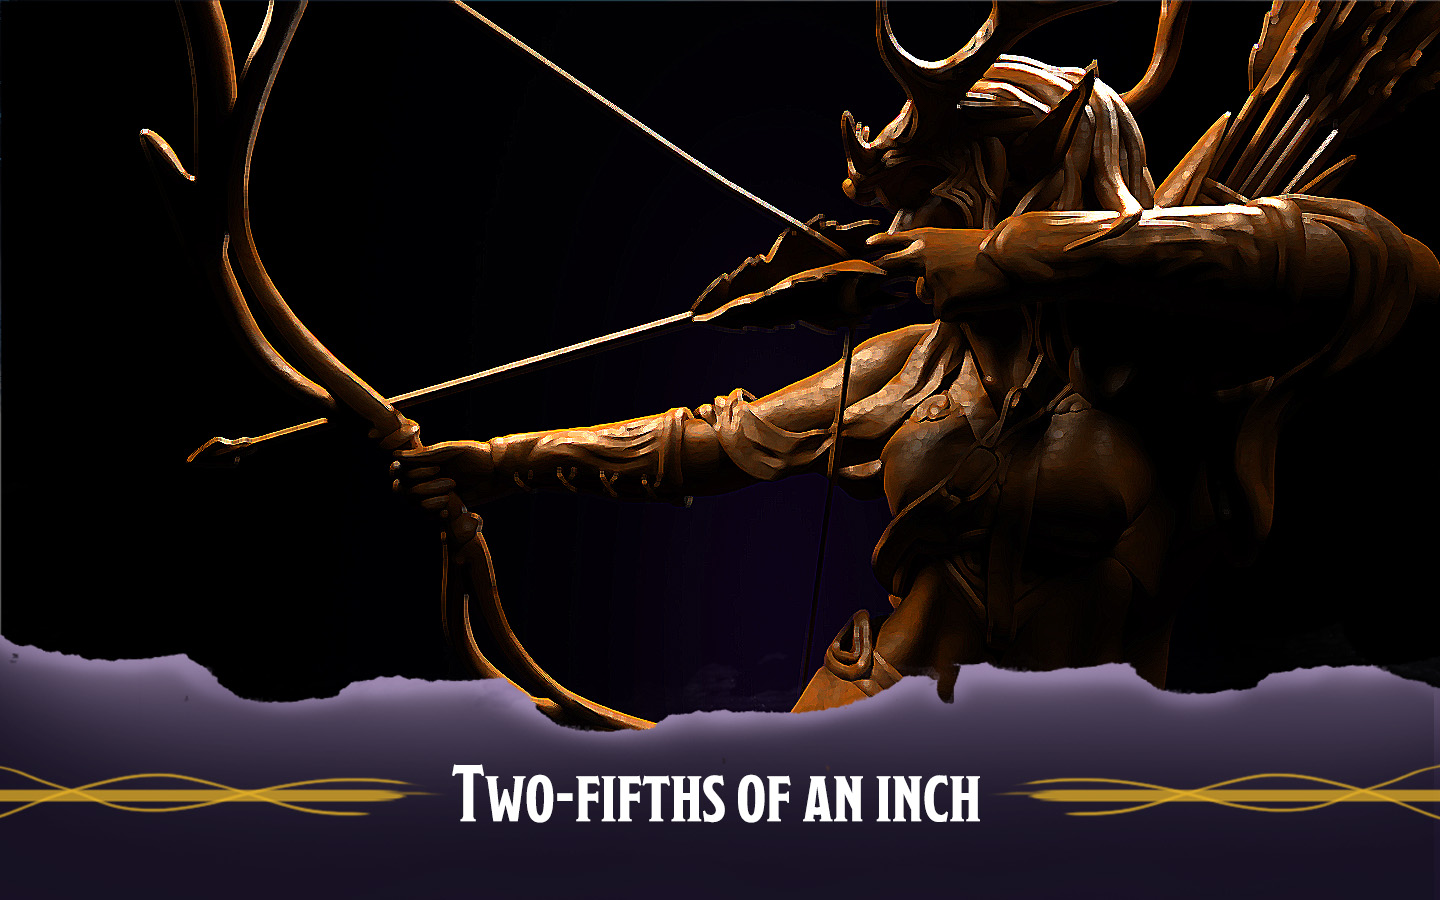 Two-fifths of an inch – A short story about rites & beasts